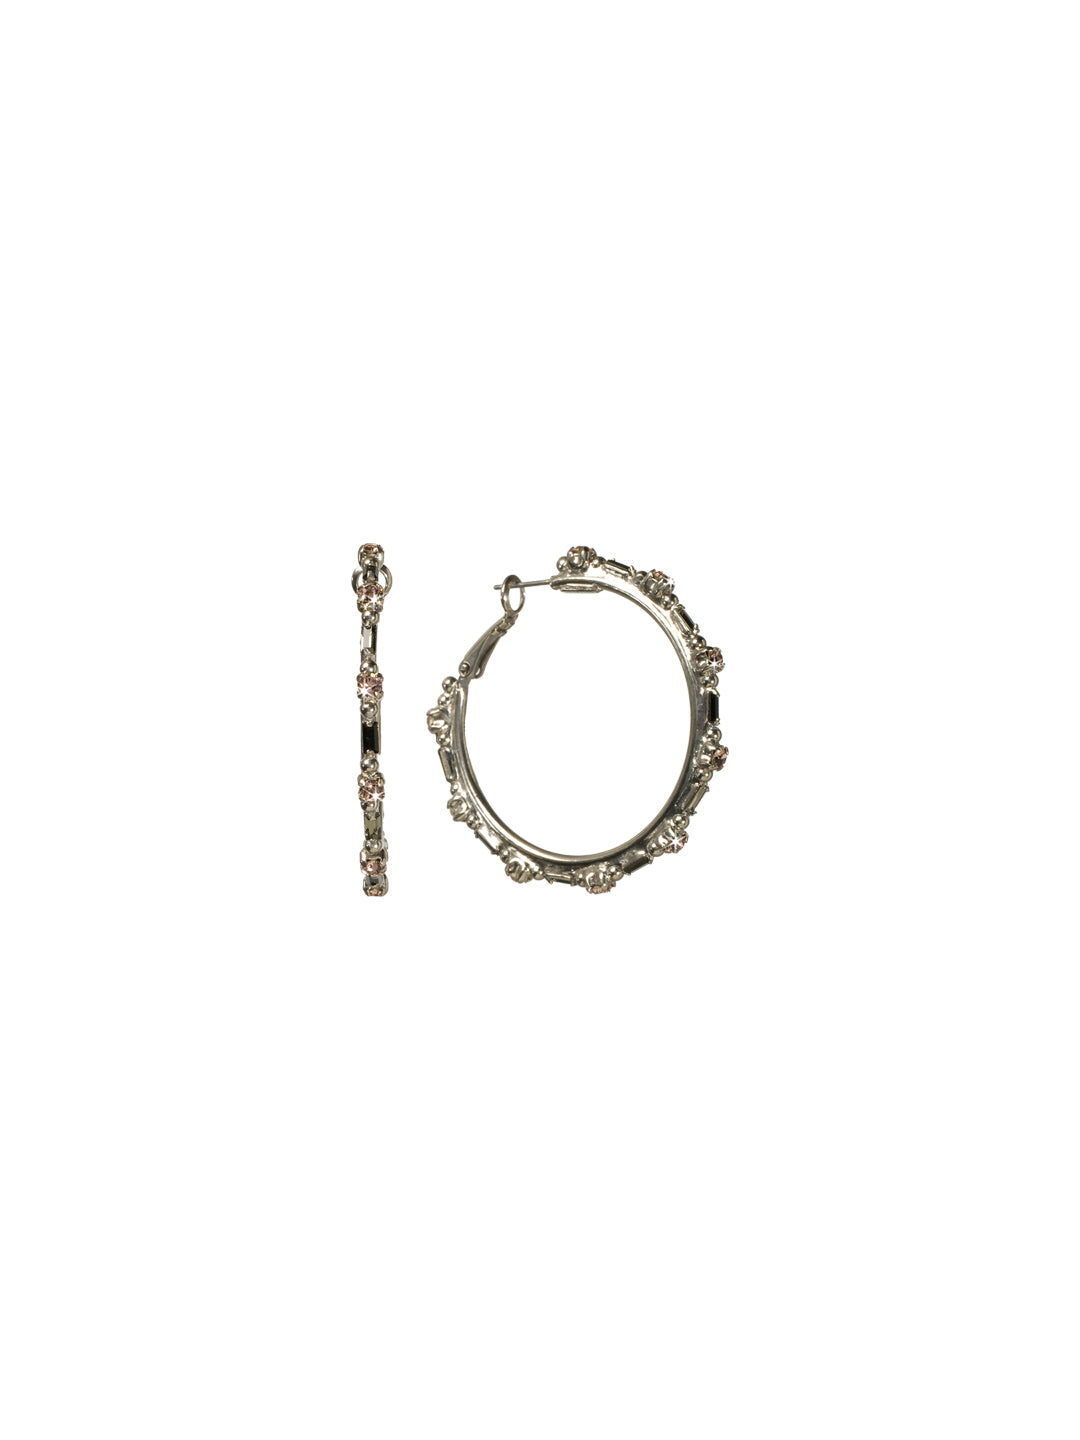 Single Space Hoop Earring Hoop Earrings - ECK35ASFB - A stunning classic, this design spotlights round and baguette stones set off by metal detailing on a hoop. From Sorrelli's French Blush collection in our Antique Silver-tone finish.